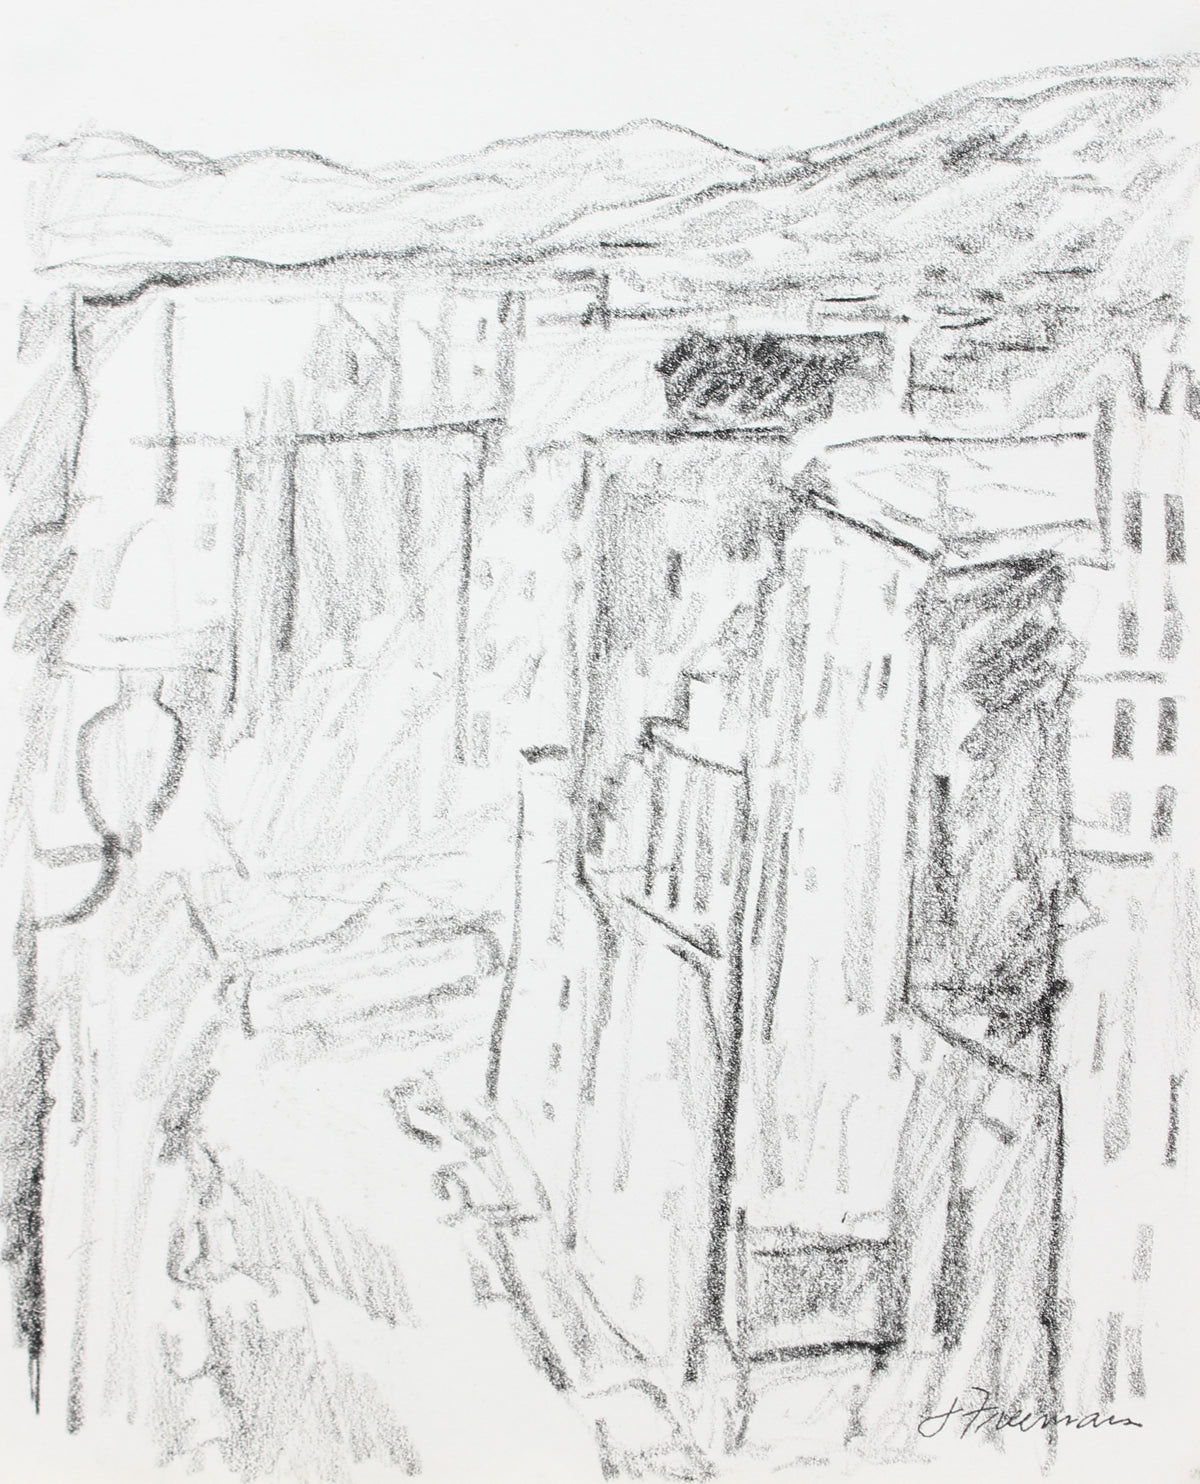 Abstracted S.F. Skyline&lt;br&gt;20th Century Graphite&lt;br&gt;&lt;br&gt;#A5042